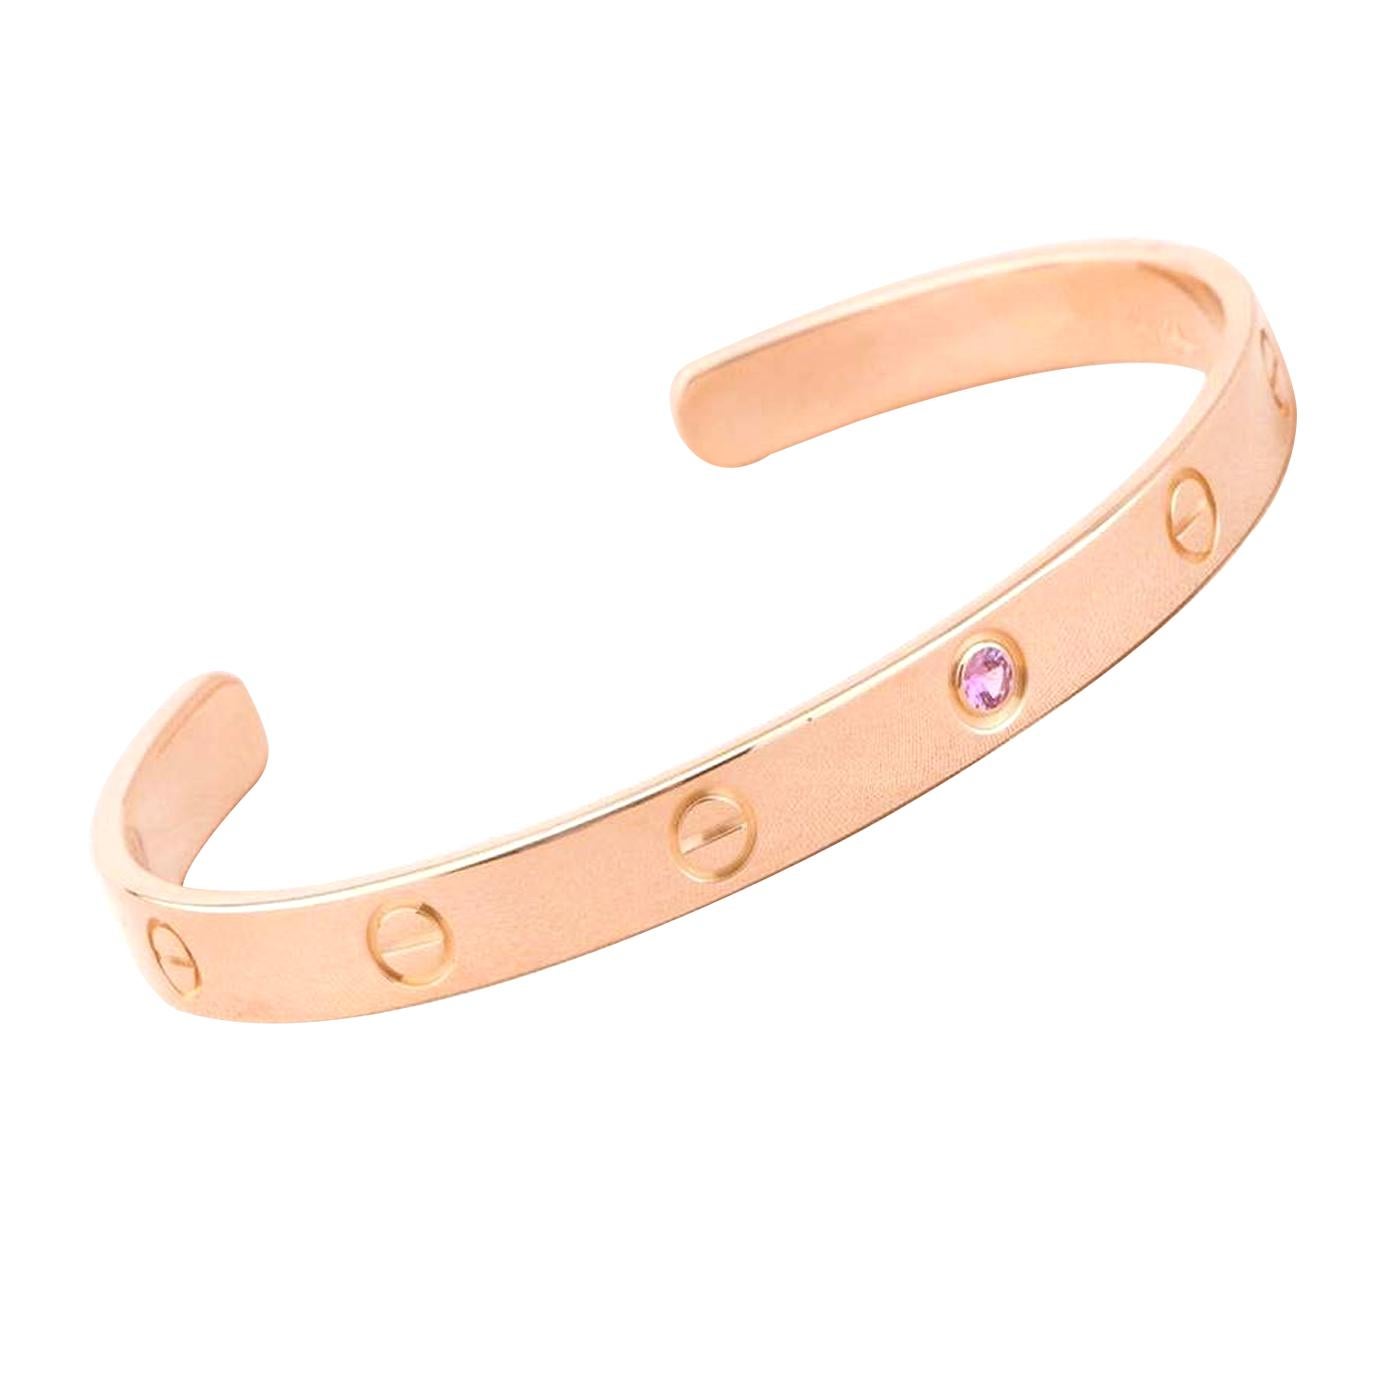 Cartier's Love bracelet is a modern symbol of luxury and a way to lock in one's love. Designed in an oval shape to comfortably sit around your wrist, the iconic love handcuff is laid with distinct screw motifs and secured by screw